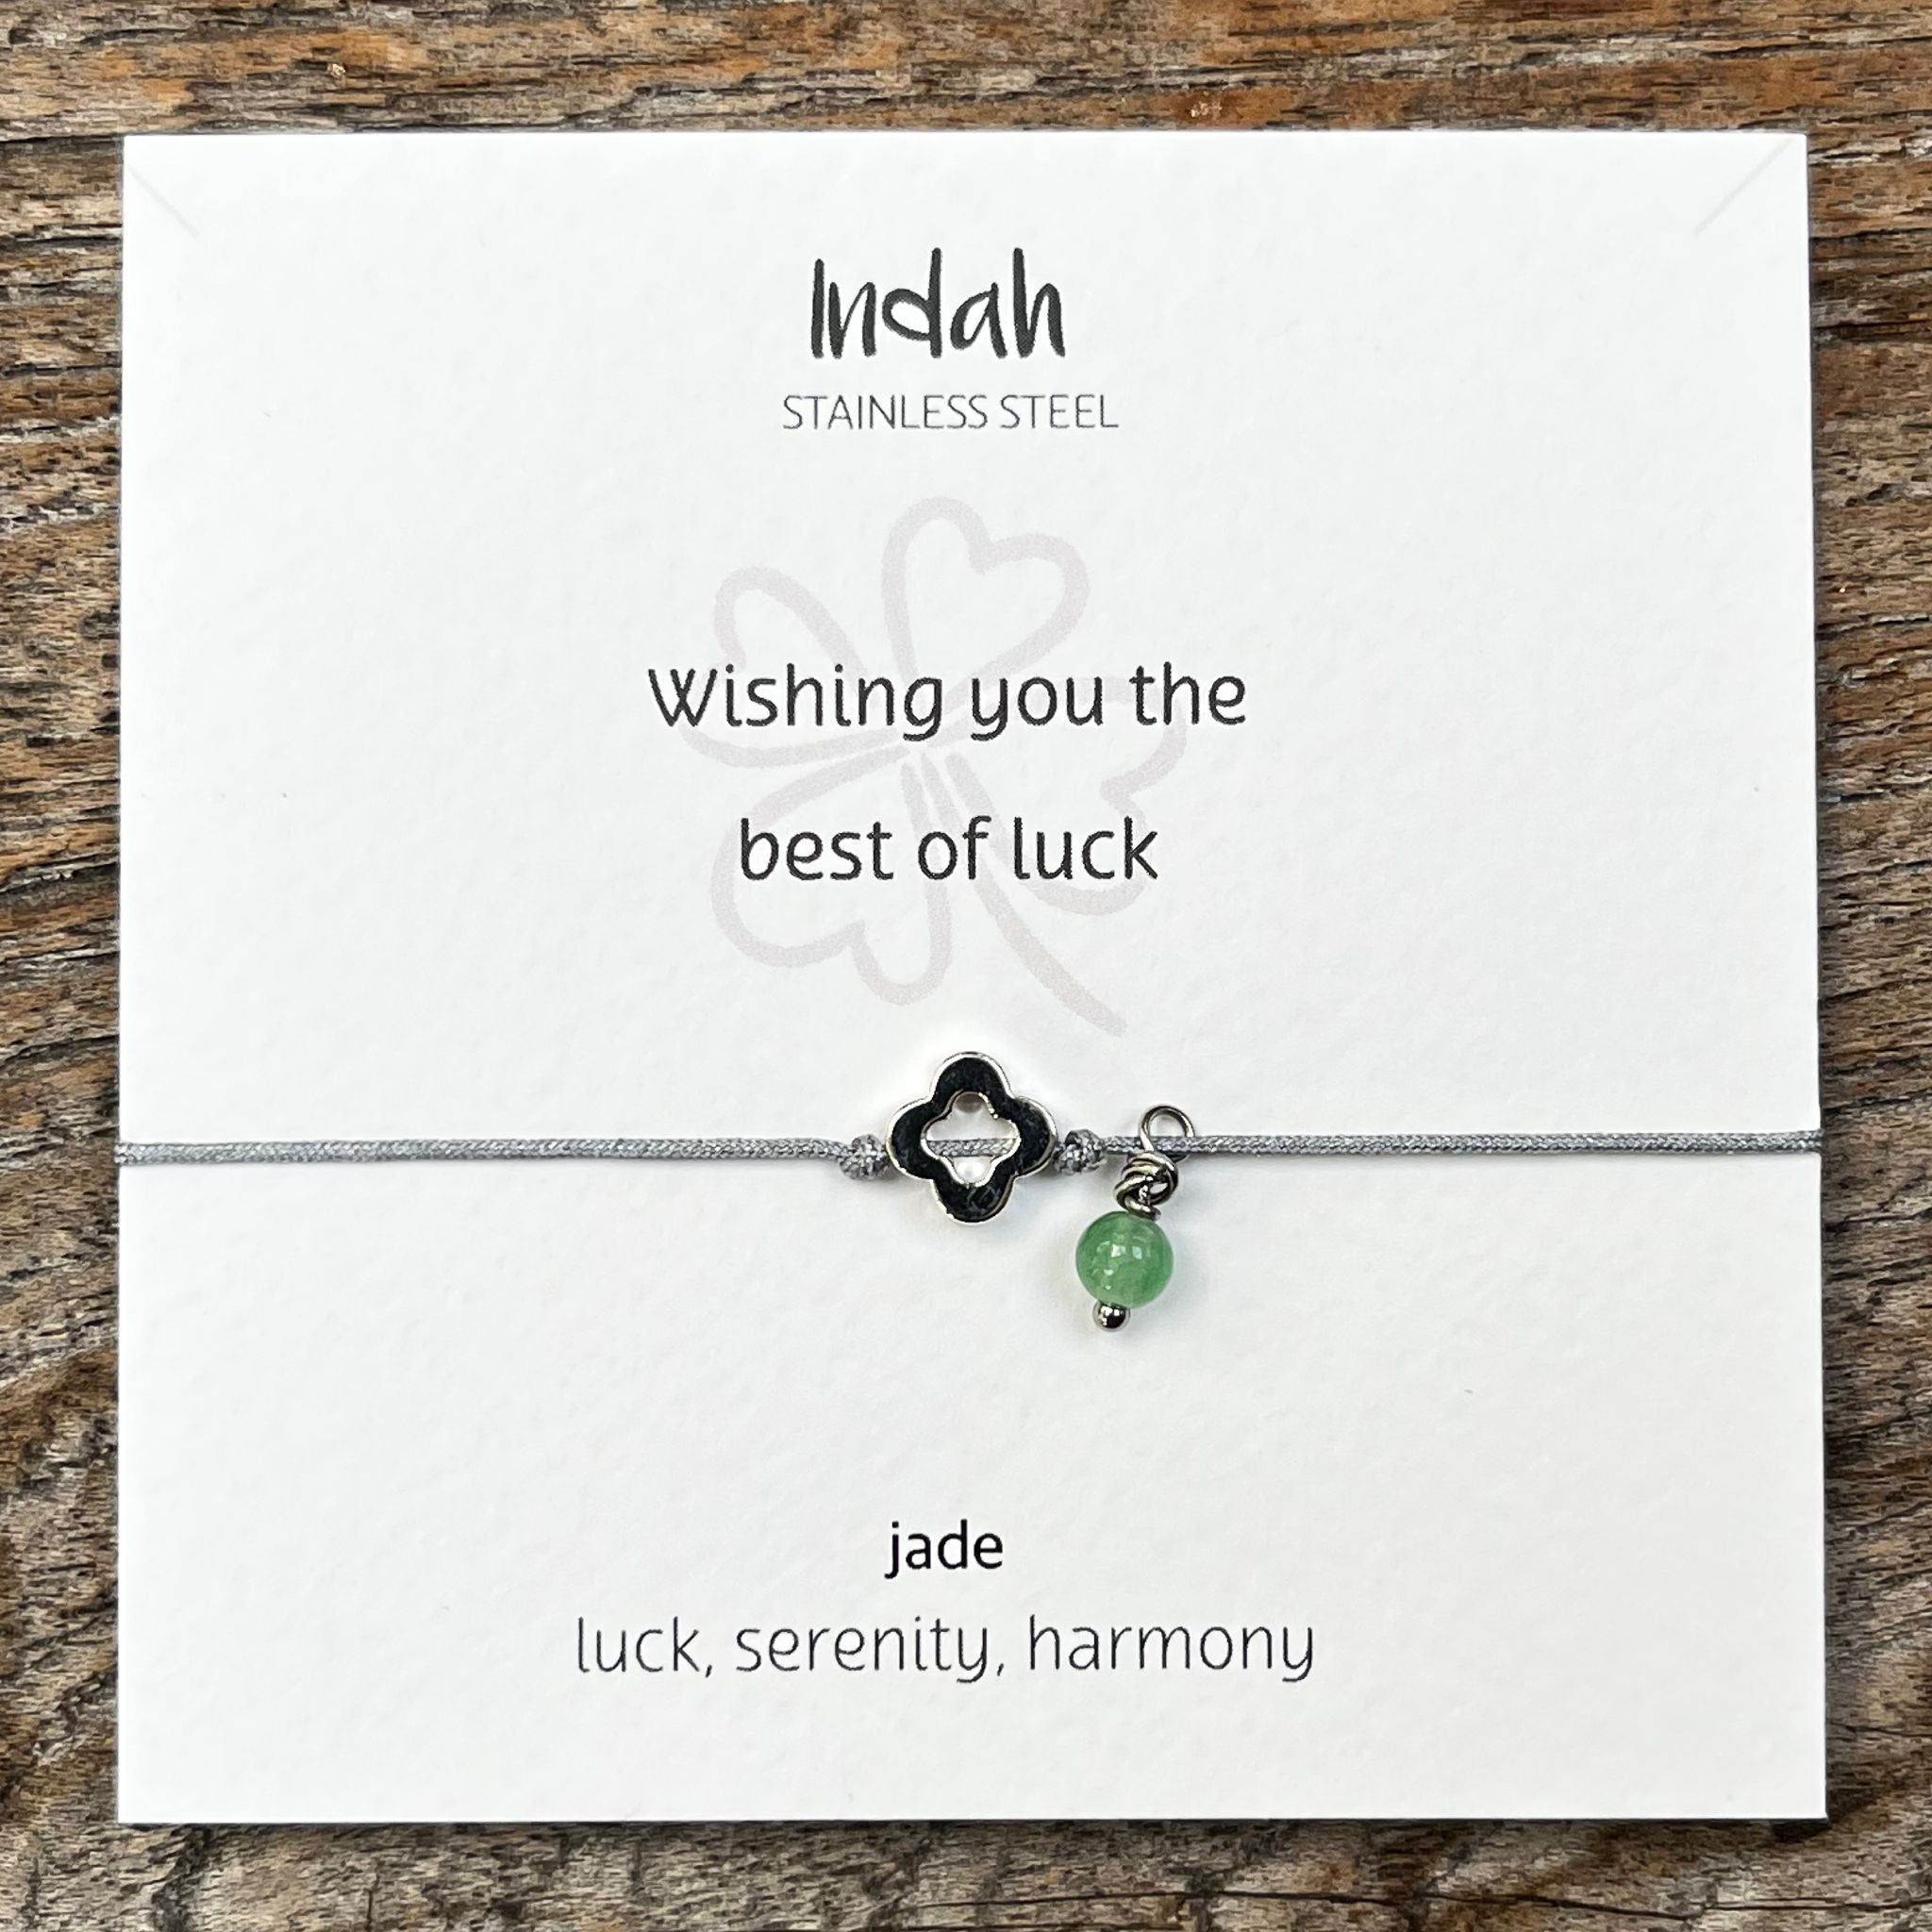 Wishing you the best of luck  - Jade Silver